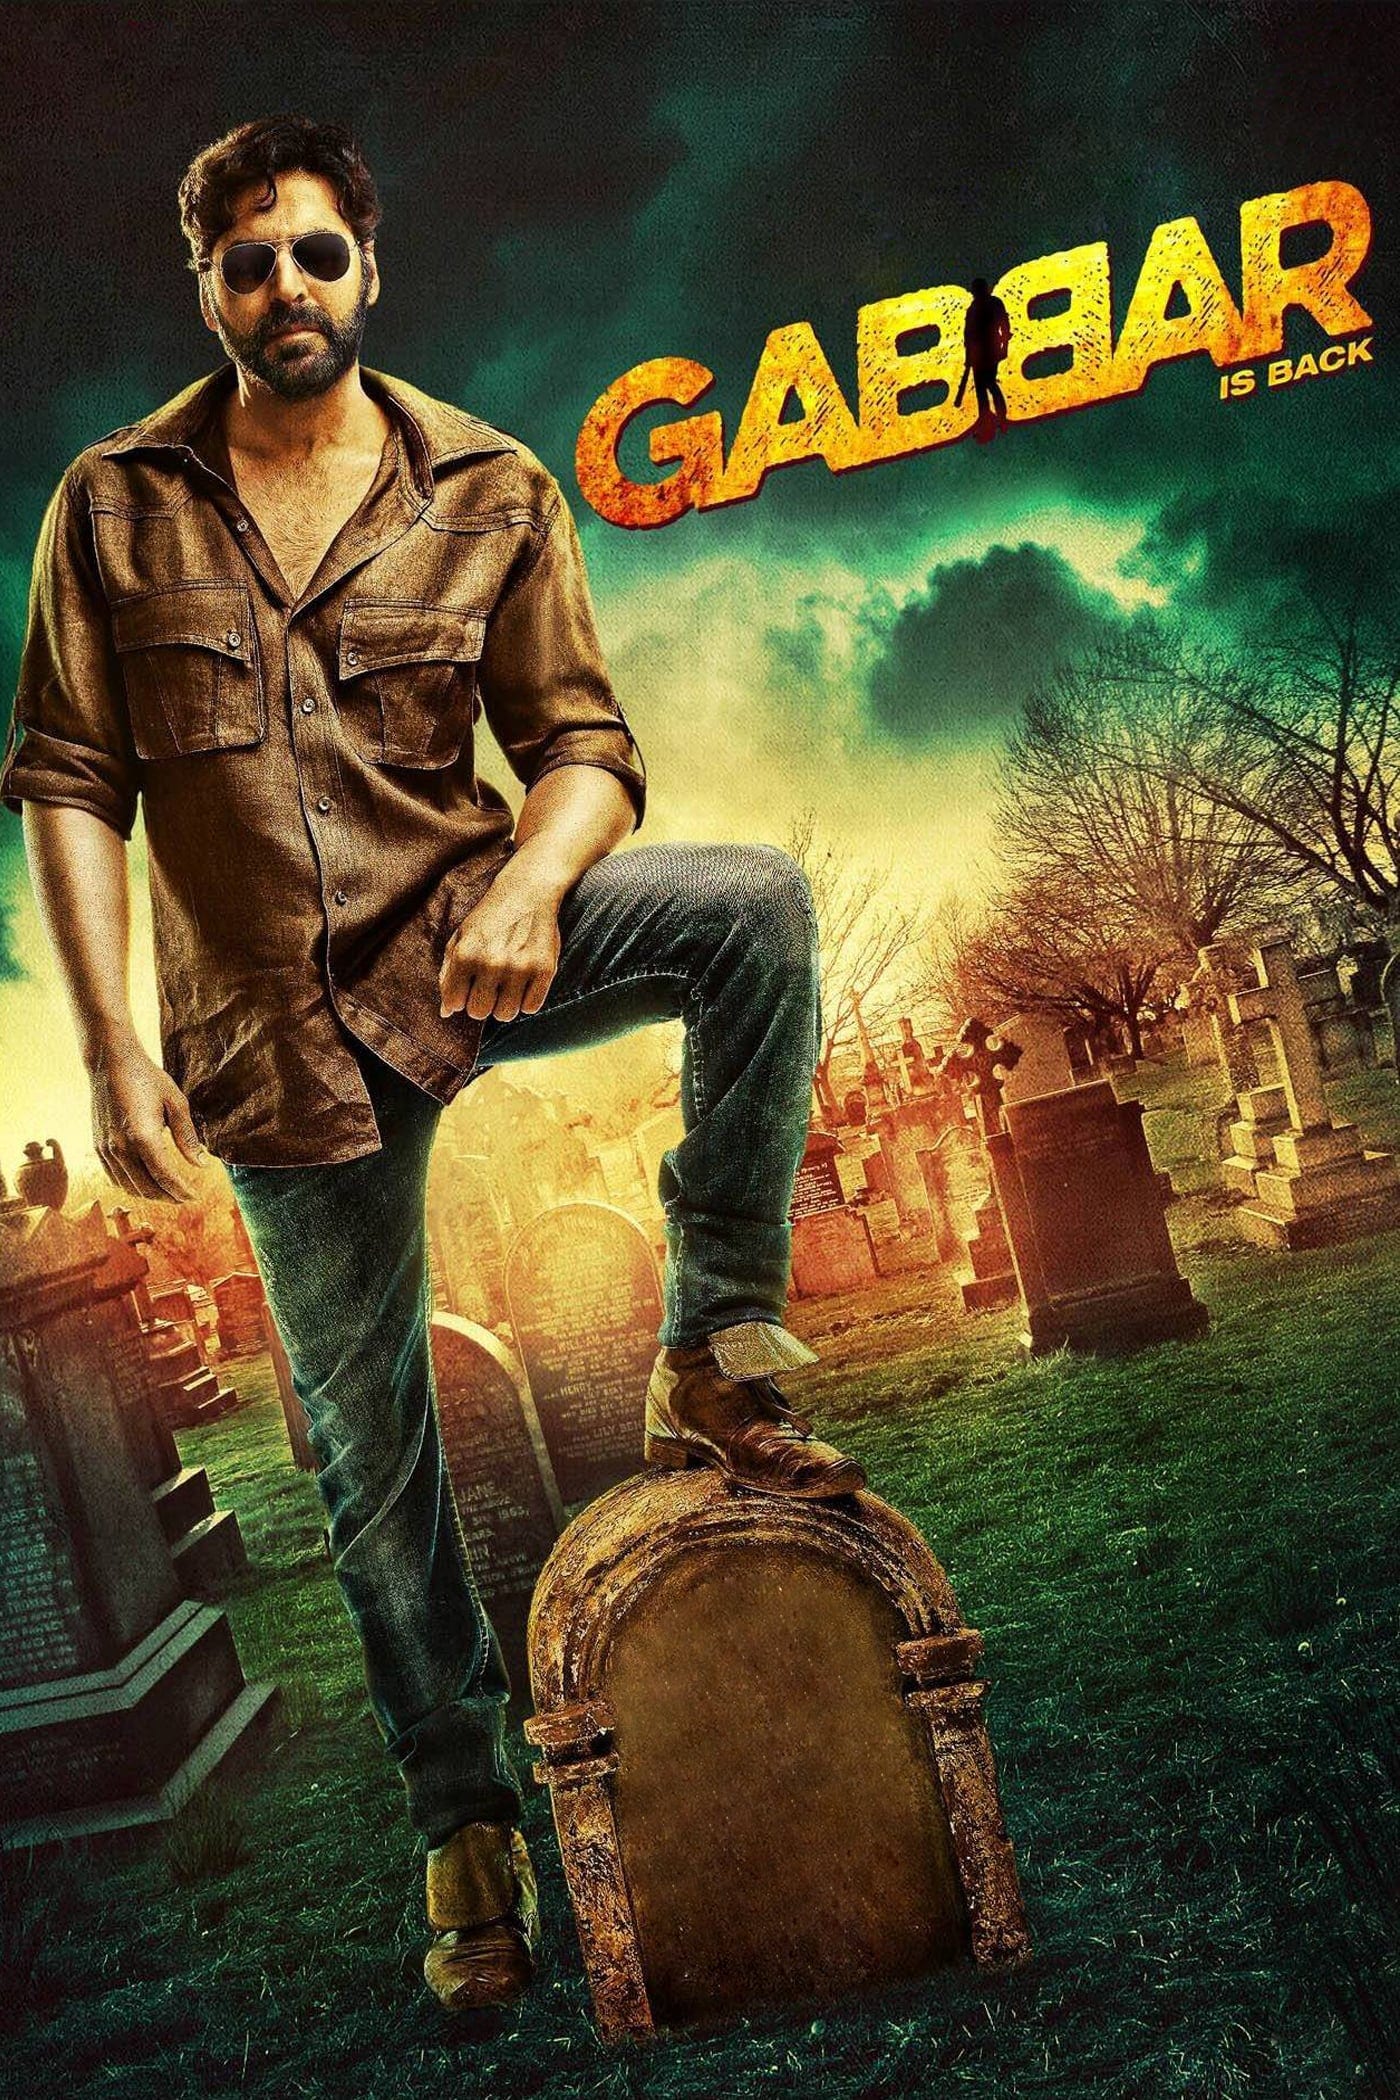 Poster for the movie "Gabbar Is Back"